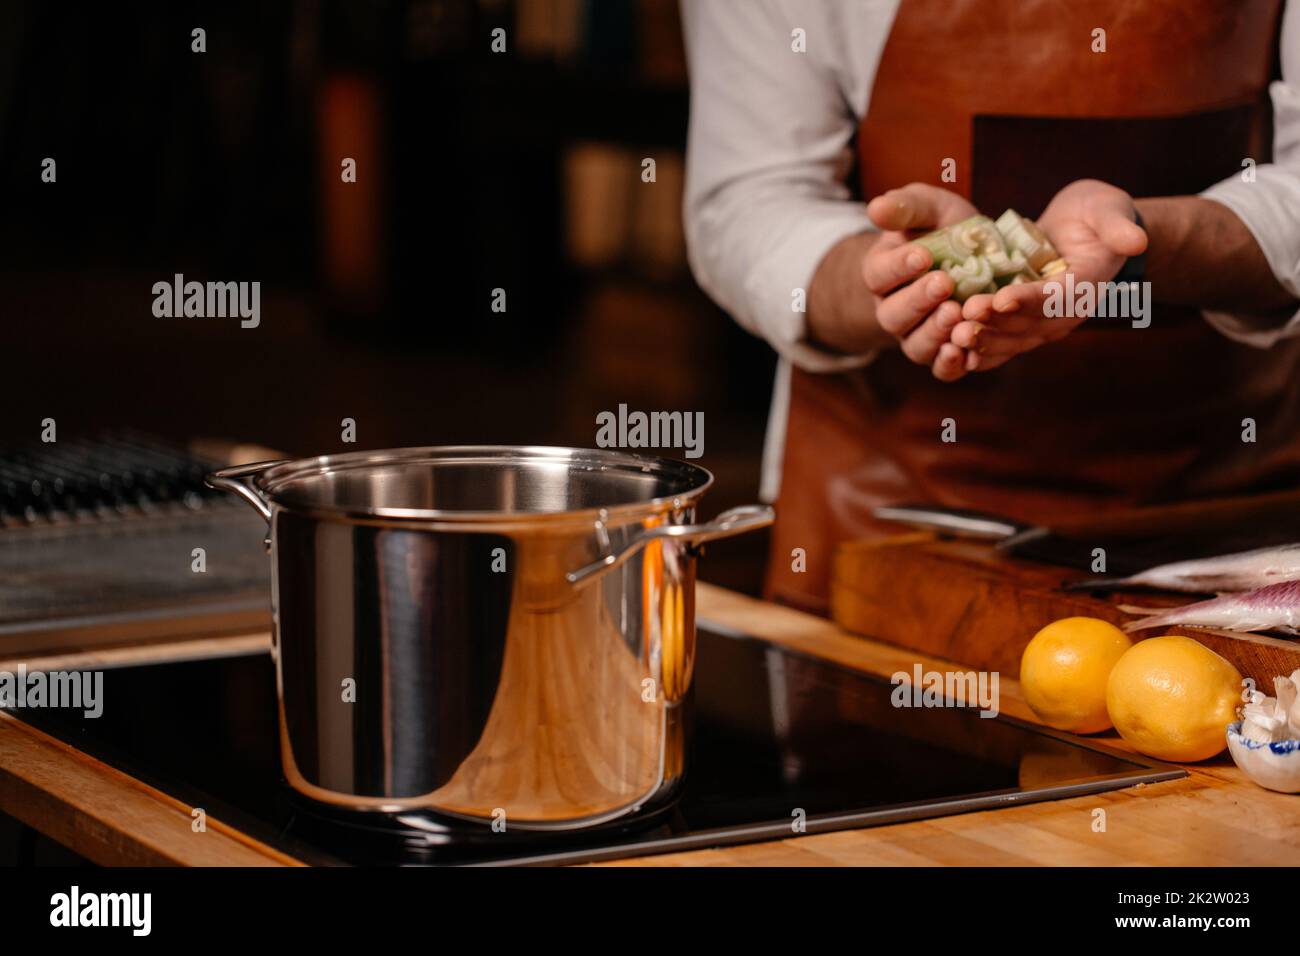 https://c8.alamy.com/comp/2K2W023/cook-cooking-ingredients-in-a-large-pot-in-a-kitchen-with-an-array-of-a-equipment-and-appliances-in-the-background-2K2W023.jpg